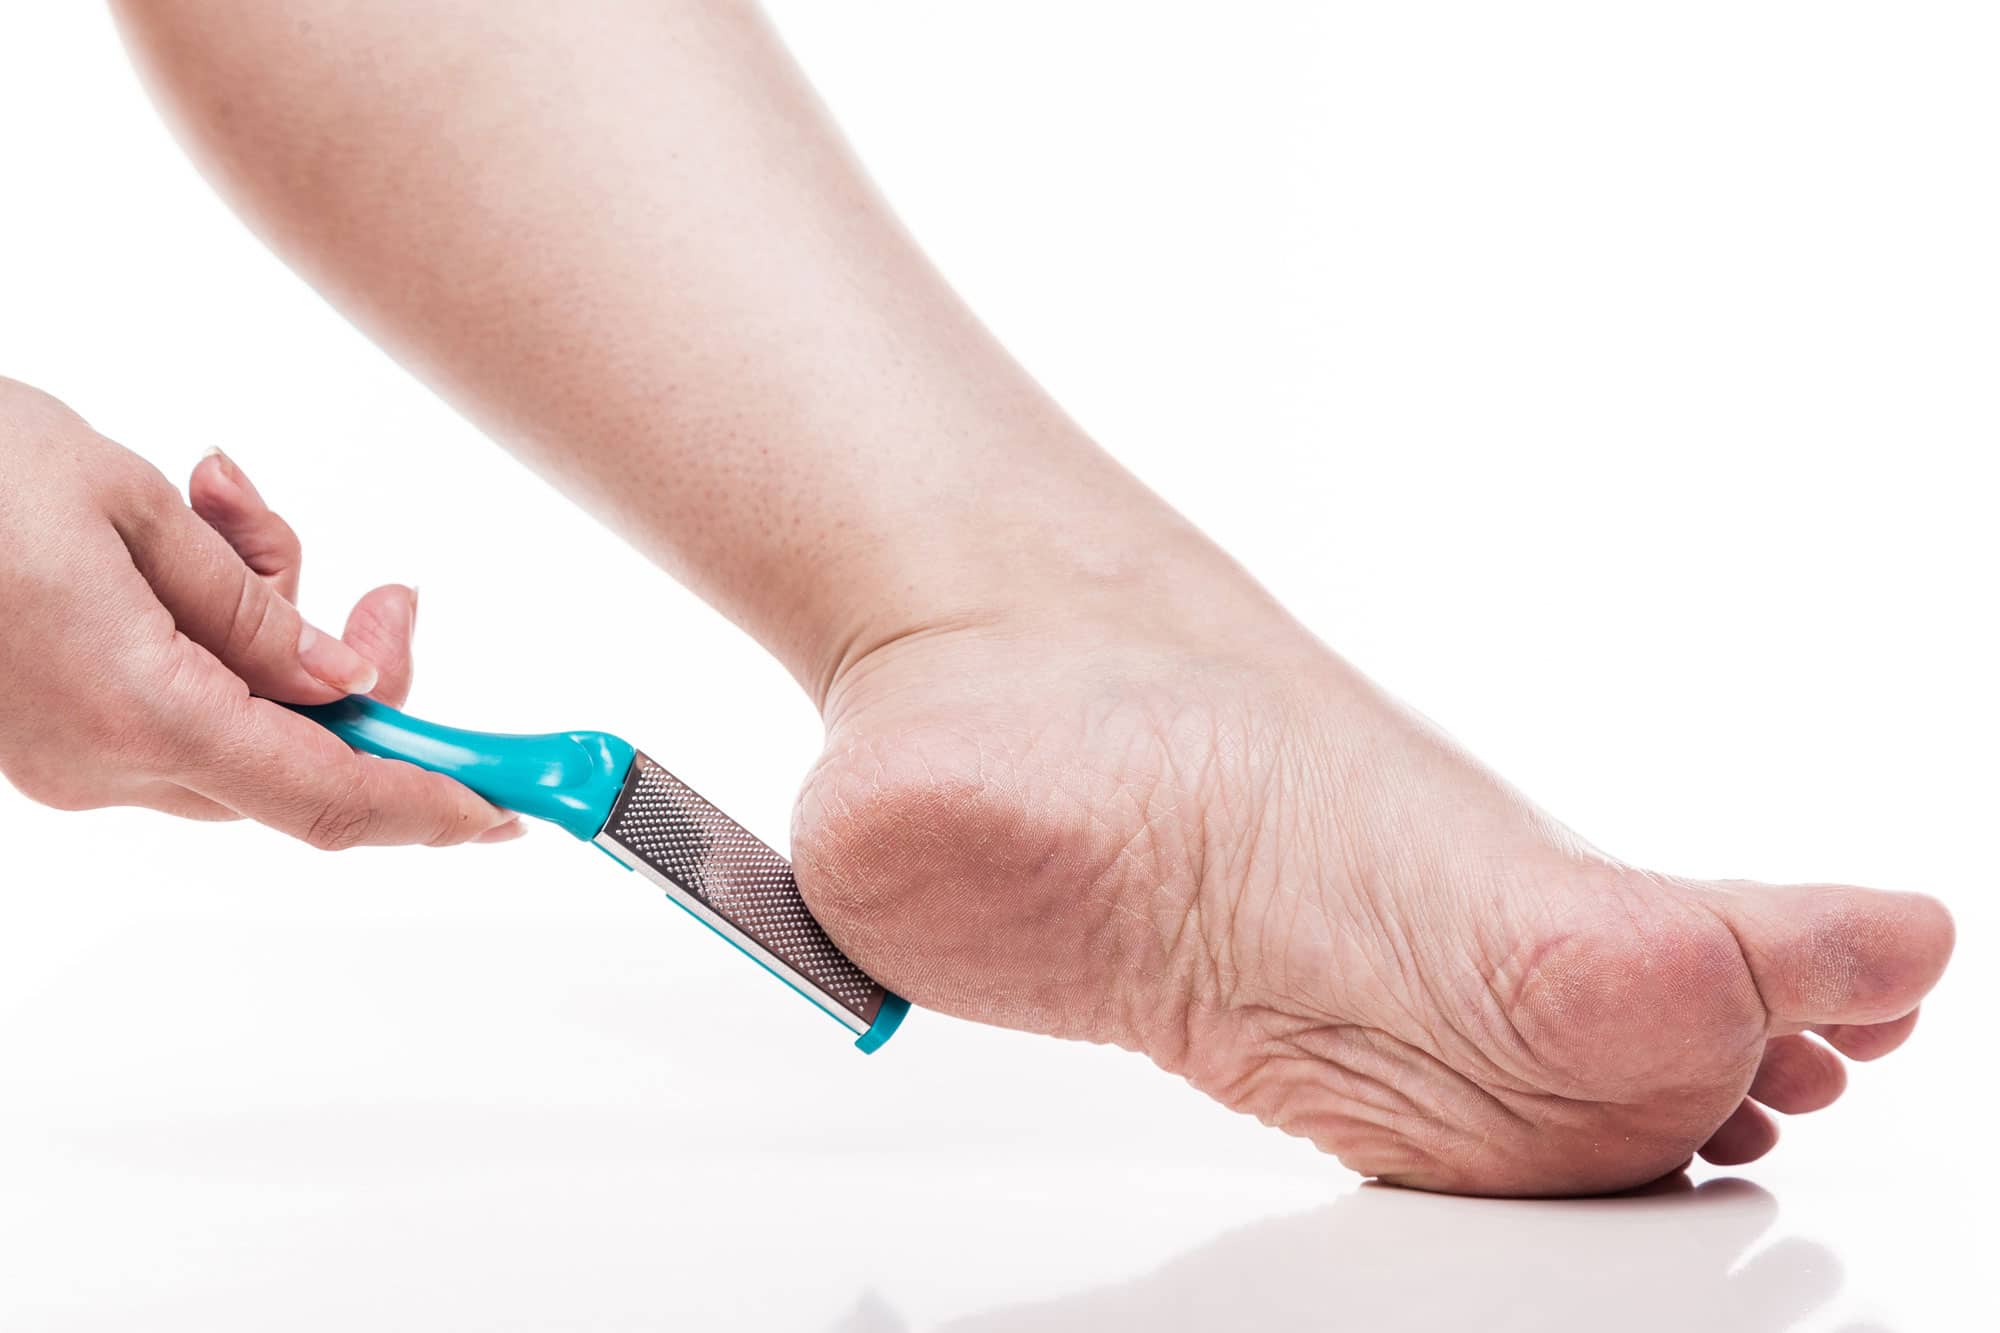 Best Foot Callus Removers To Get Smooth Feet Fast 2020